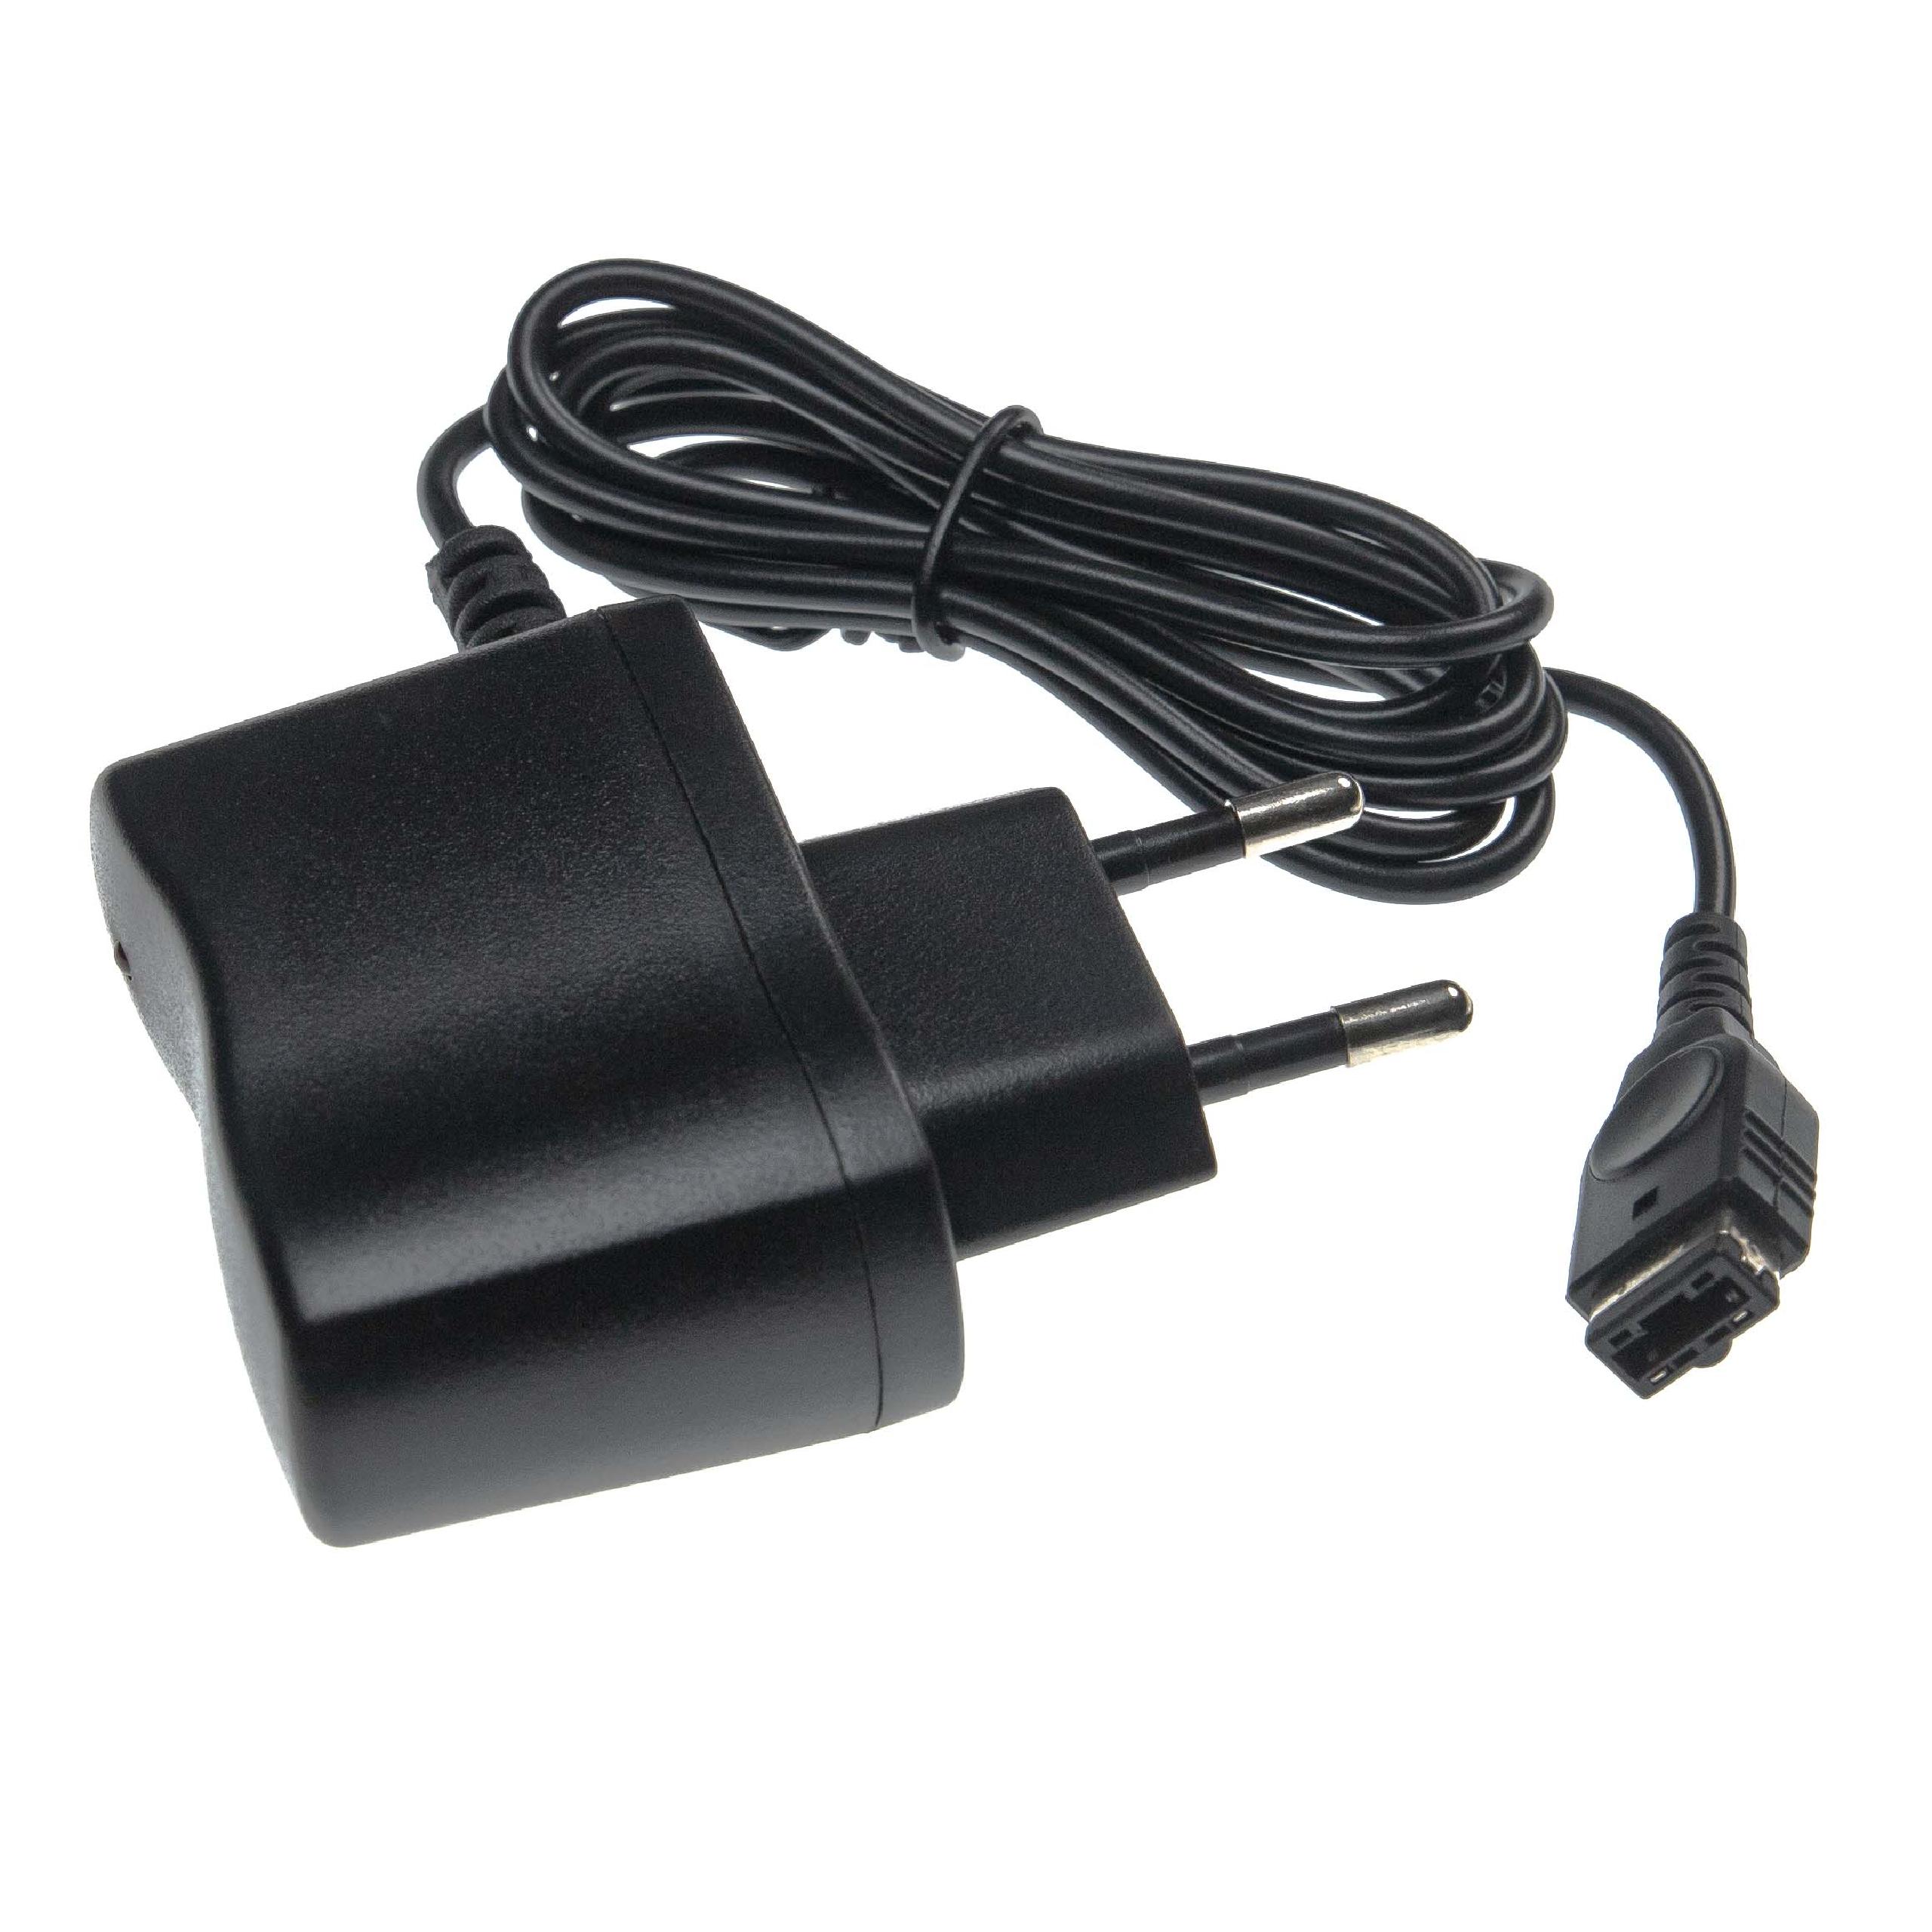 Charger suitable for Nintendo Gameboy Advance SP Game Console